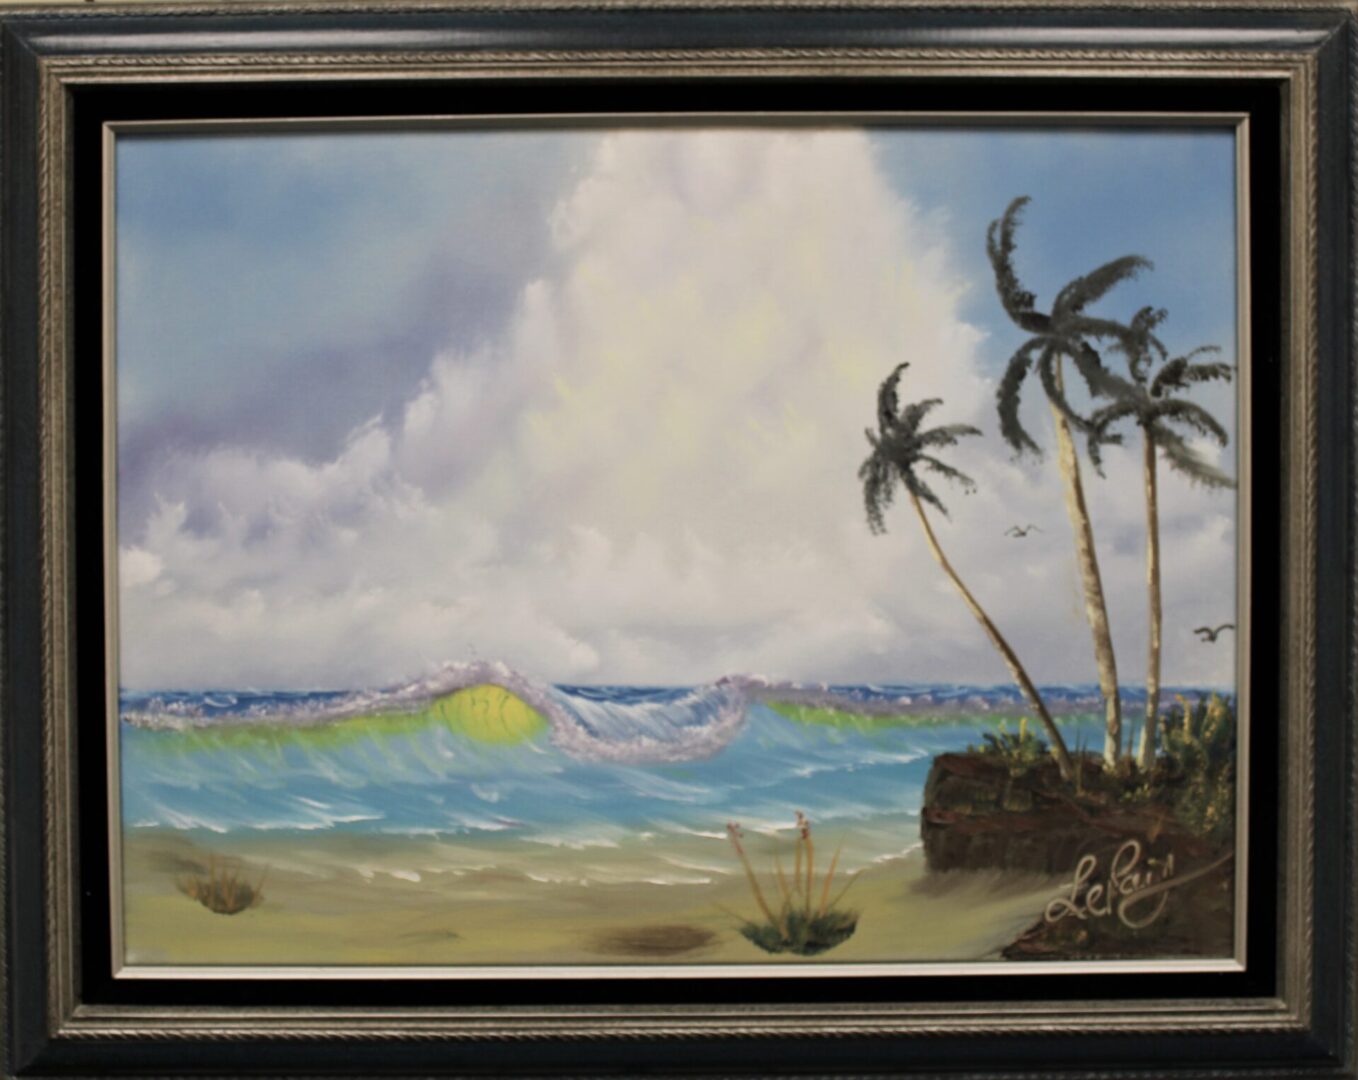 framed painting of beach with palm trees